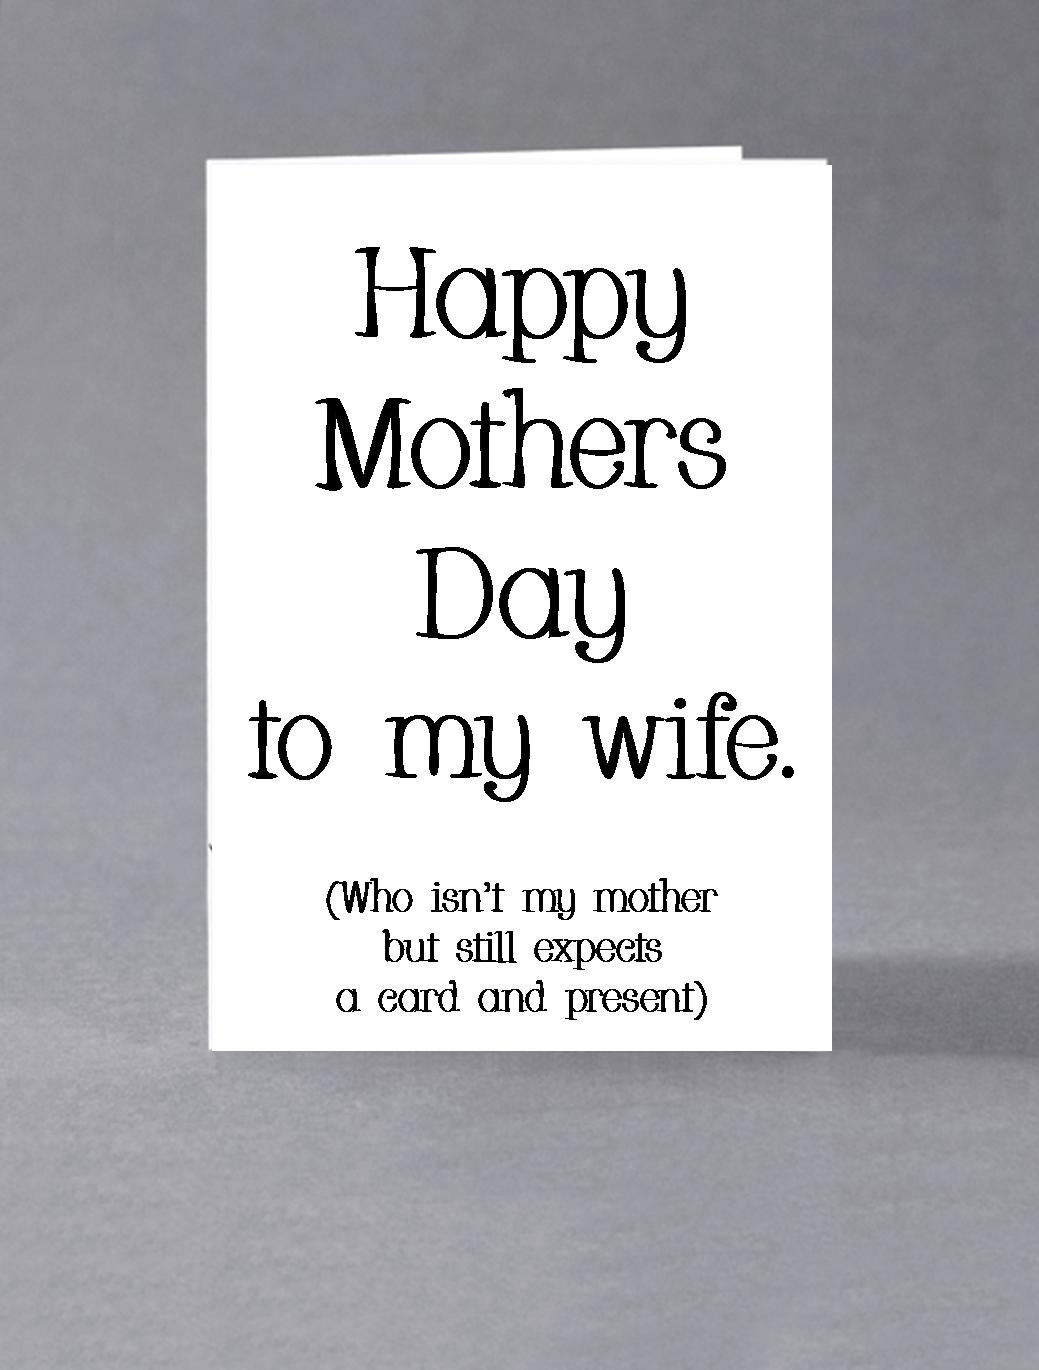 funny-mother-s-day-cards-for-grandma-mothers-card-funny-happy-sarcastic